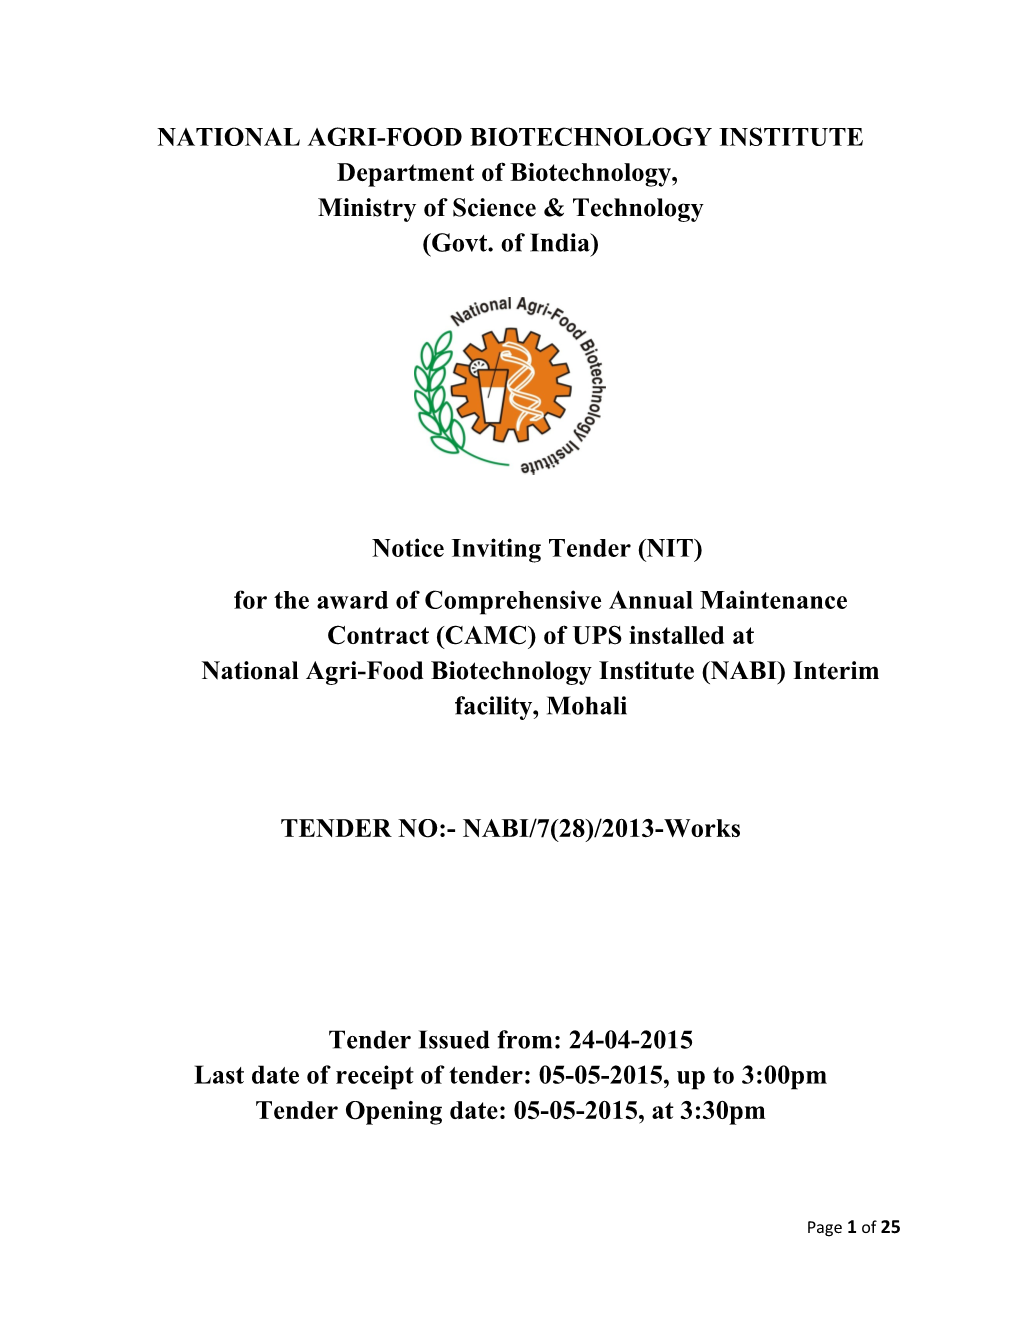 National Agri-Food Biotechnology Institute s2